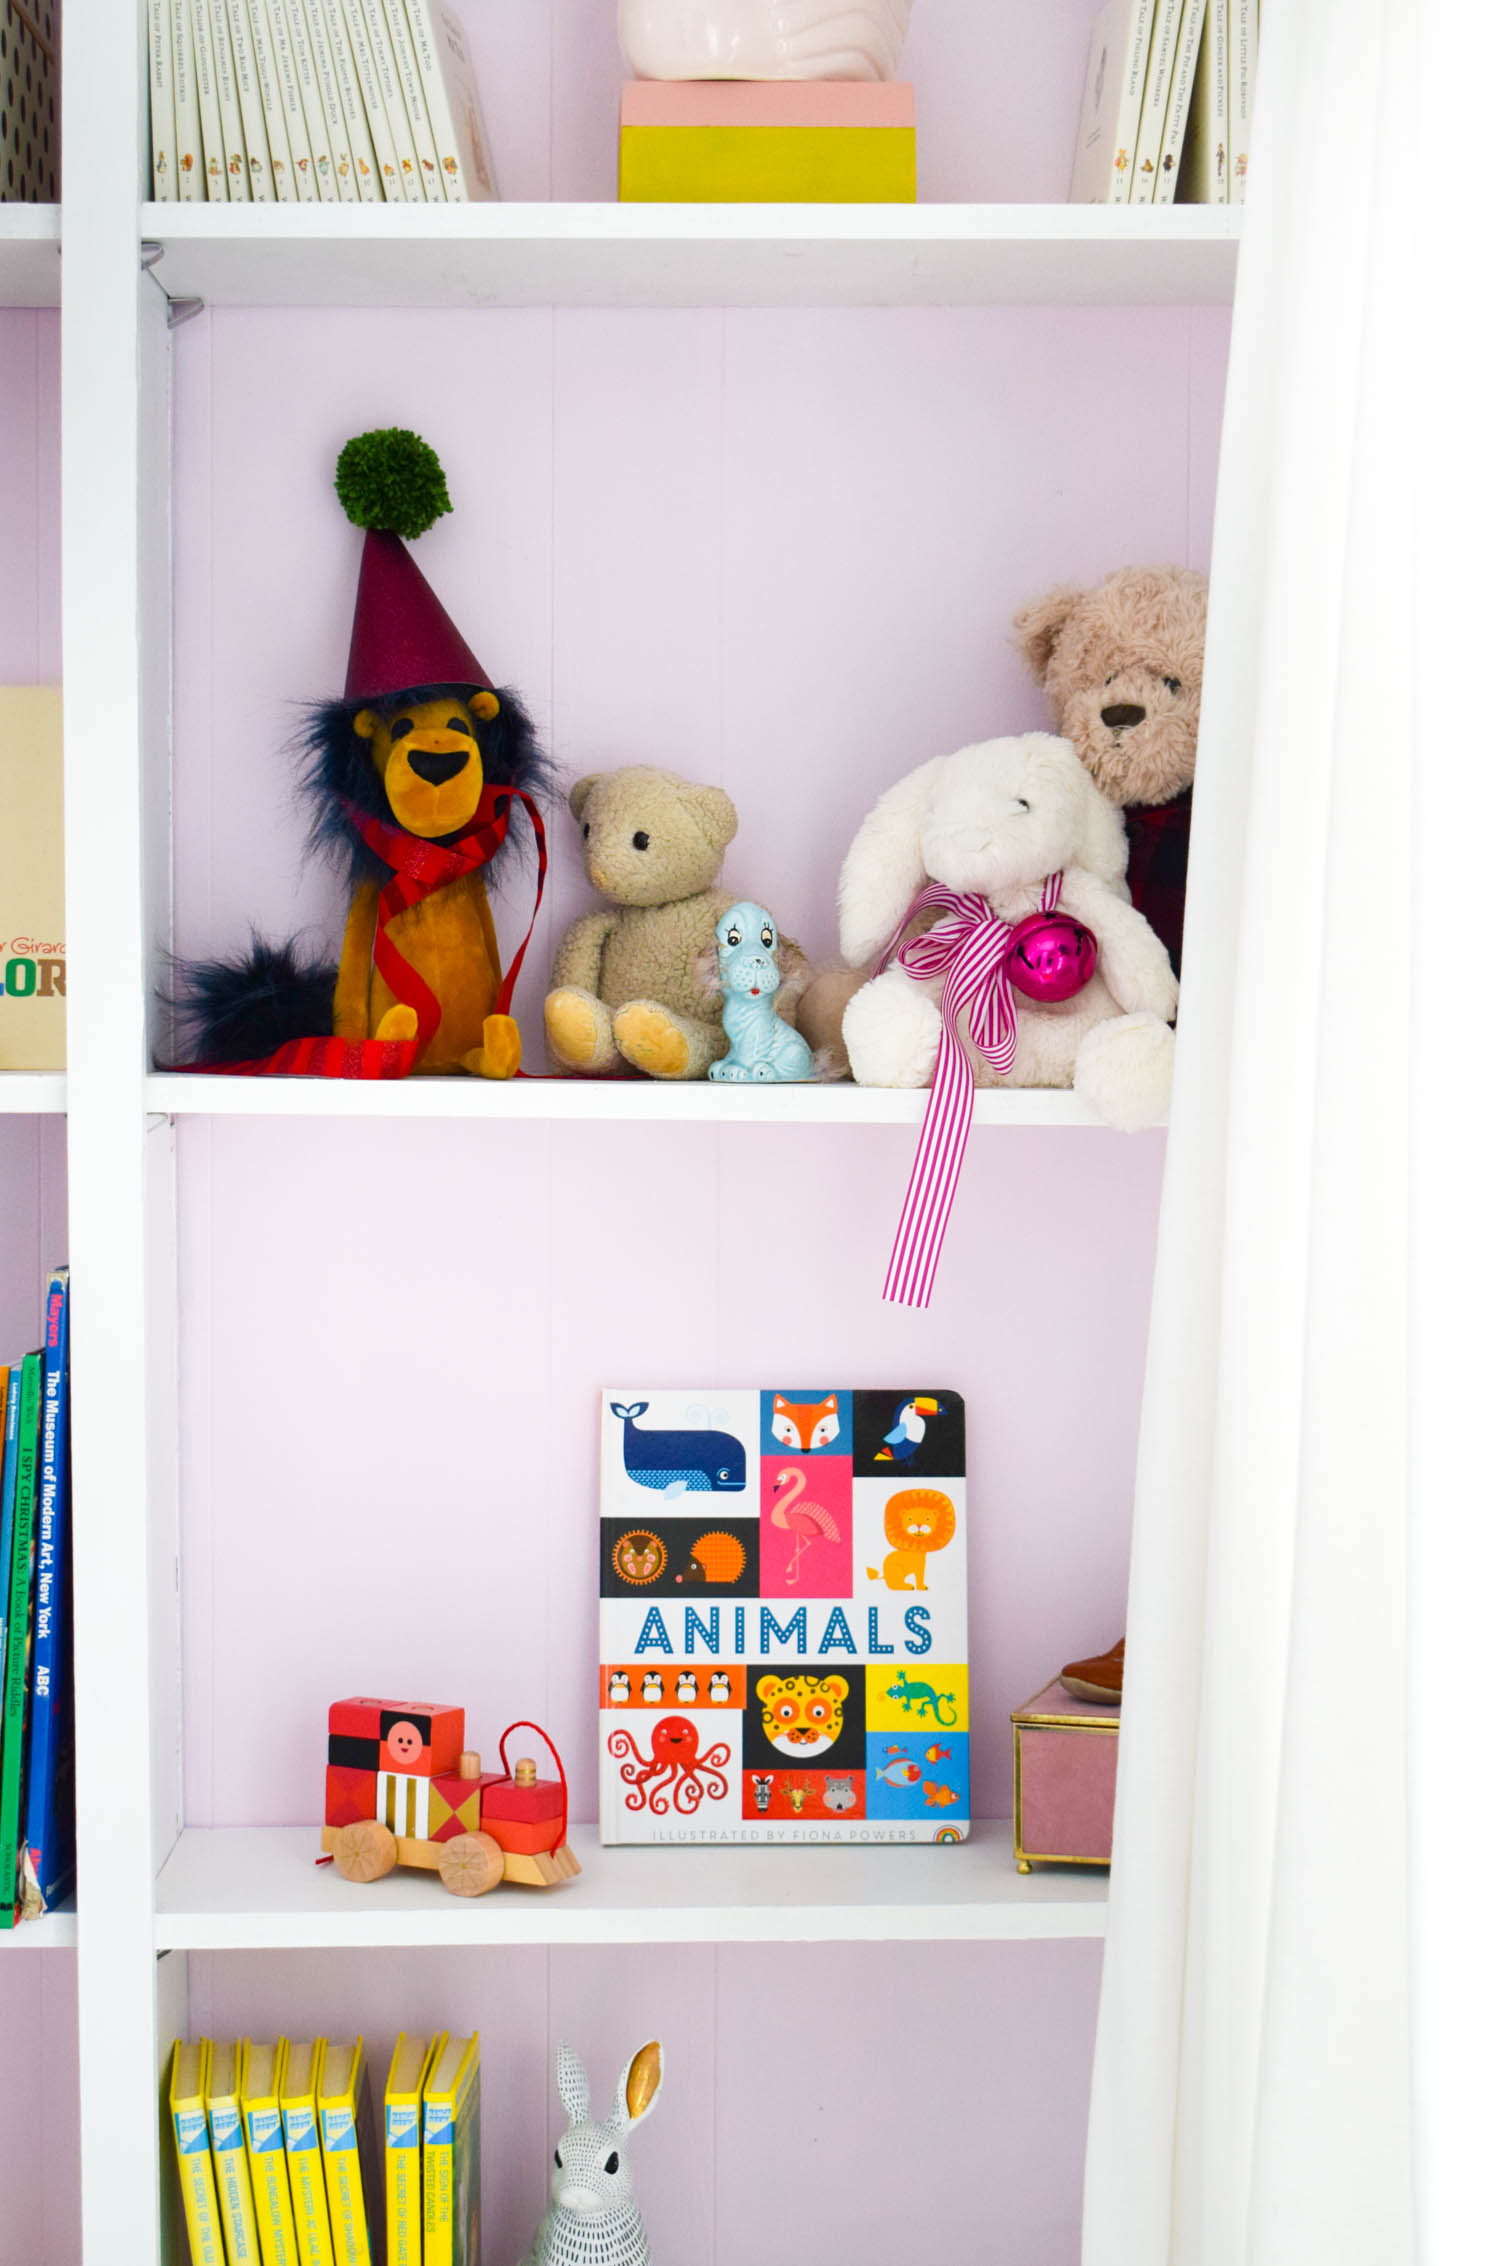 My tried and tested nursery bookshelf styling tips are easy to do, and will make any space look playful and expertly designed.